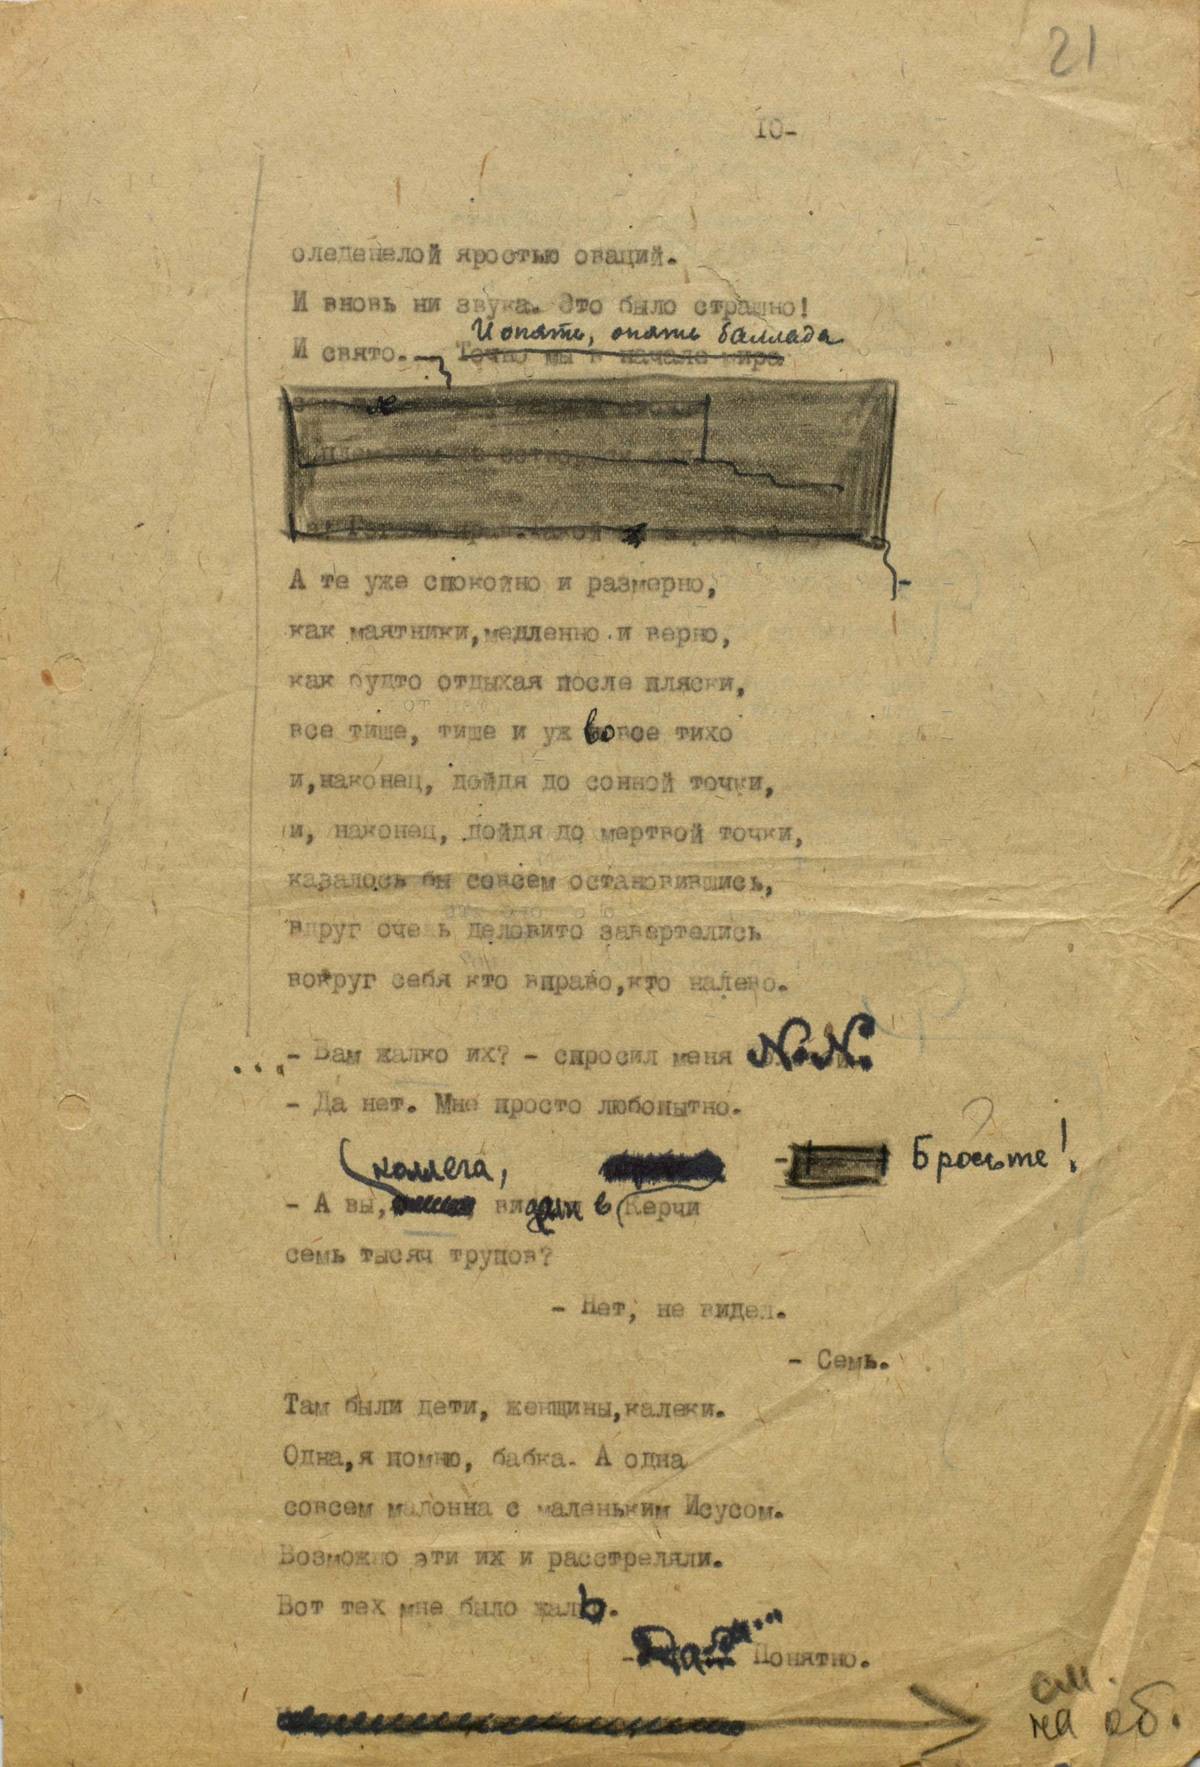 Page 10 of the third draft of Ilya Selvinsky’s ‘Trial in Krasnodar’ with major changes. Aleksey N. Tolstoy becomes N.N., a foreign journalist.